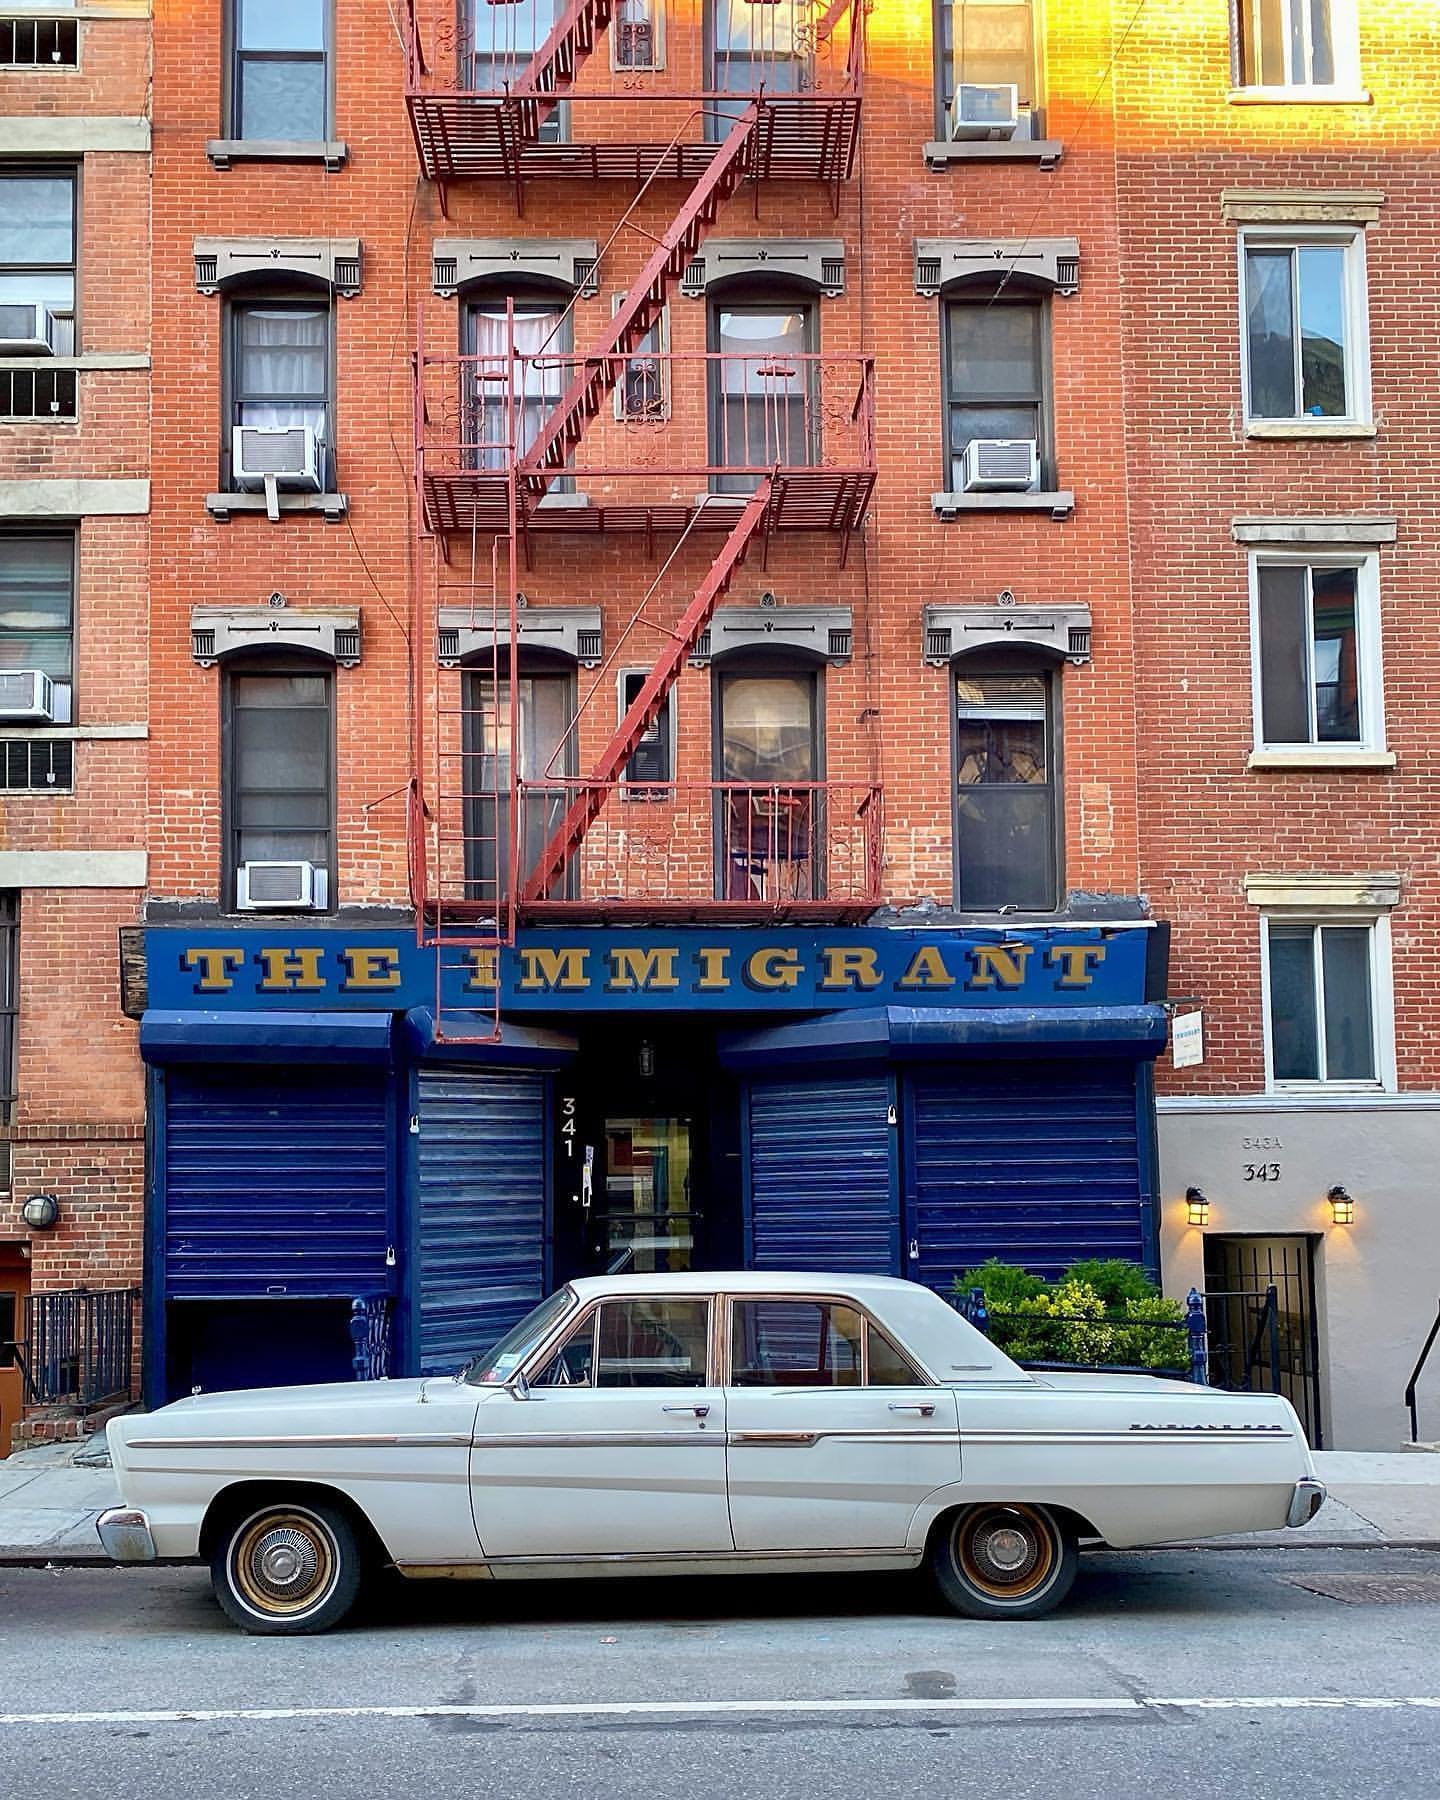 Posted @withregram &bull; @reallifeofnyc 🌞 The most photographed car in the East Village. @theimmigrant_nyc 
.
.
.
.
#vintagenyc #oldnewyork #classiccars #vintagecars #carcollector #eastvillage #newyorkcity #nyc #nycityworld #nycphotos #nycphotograp